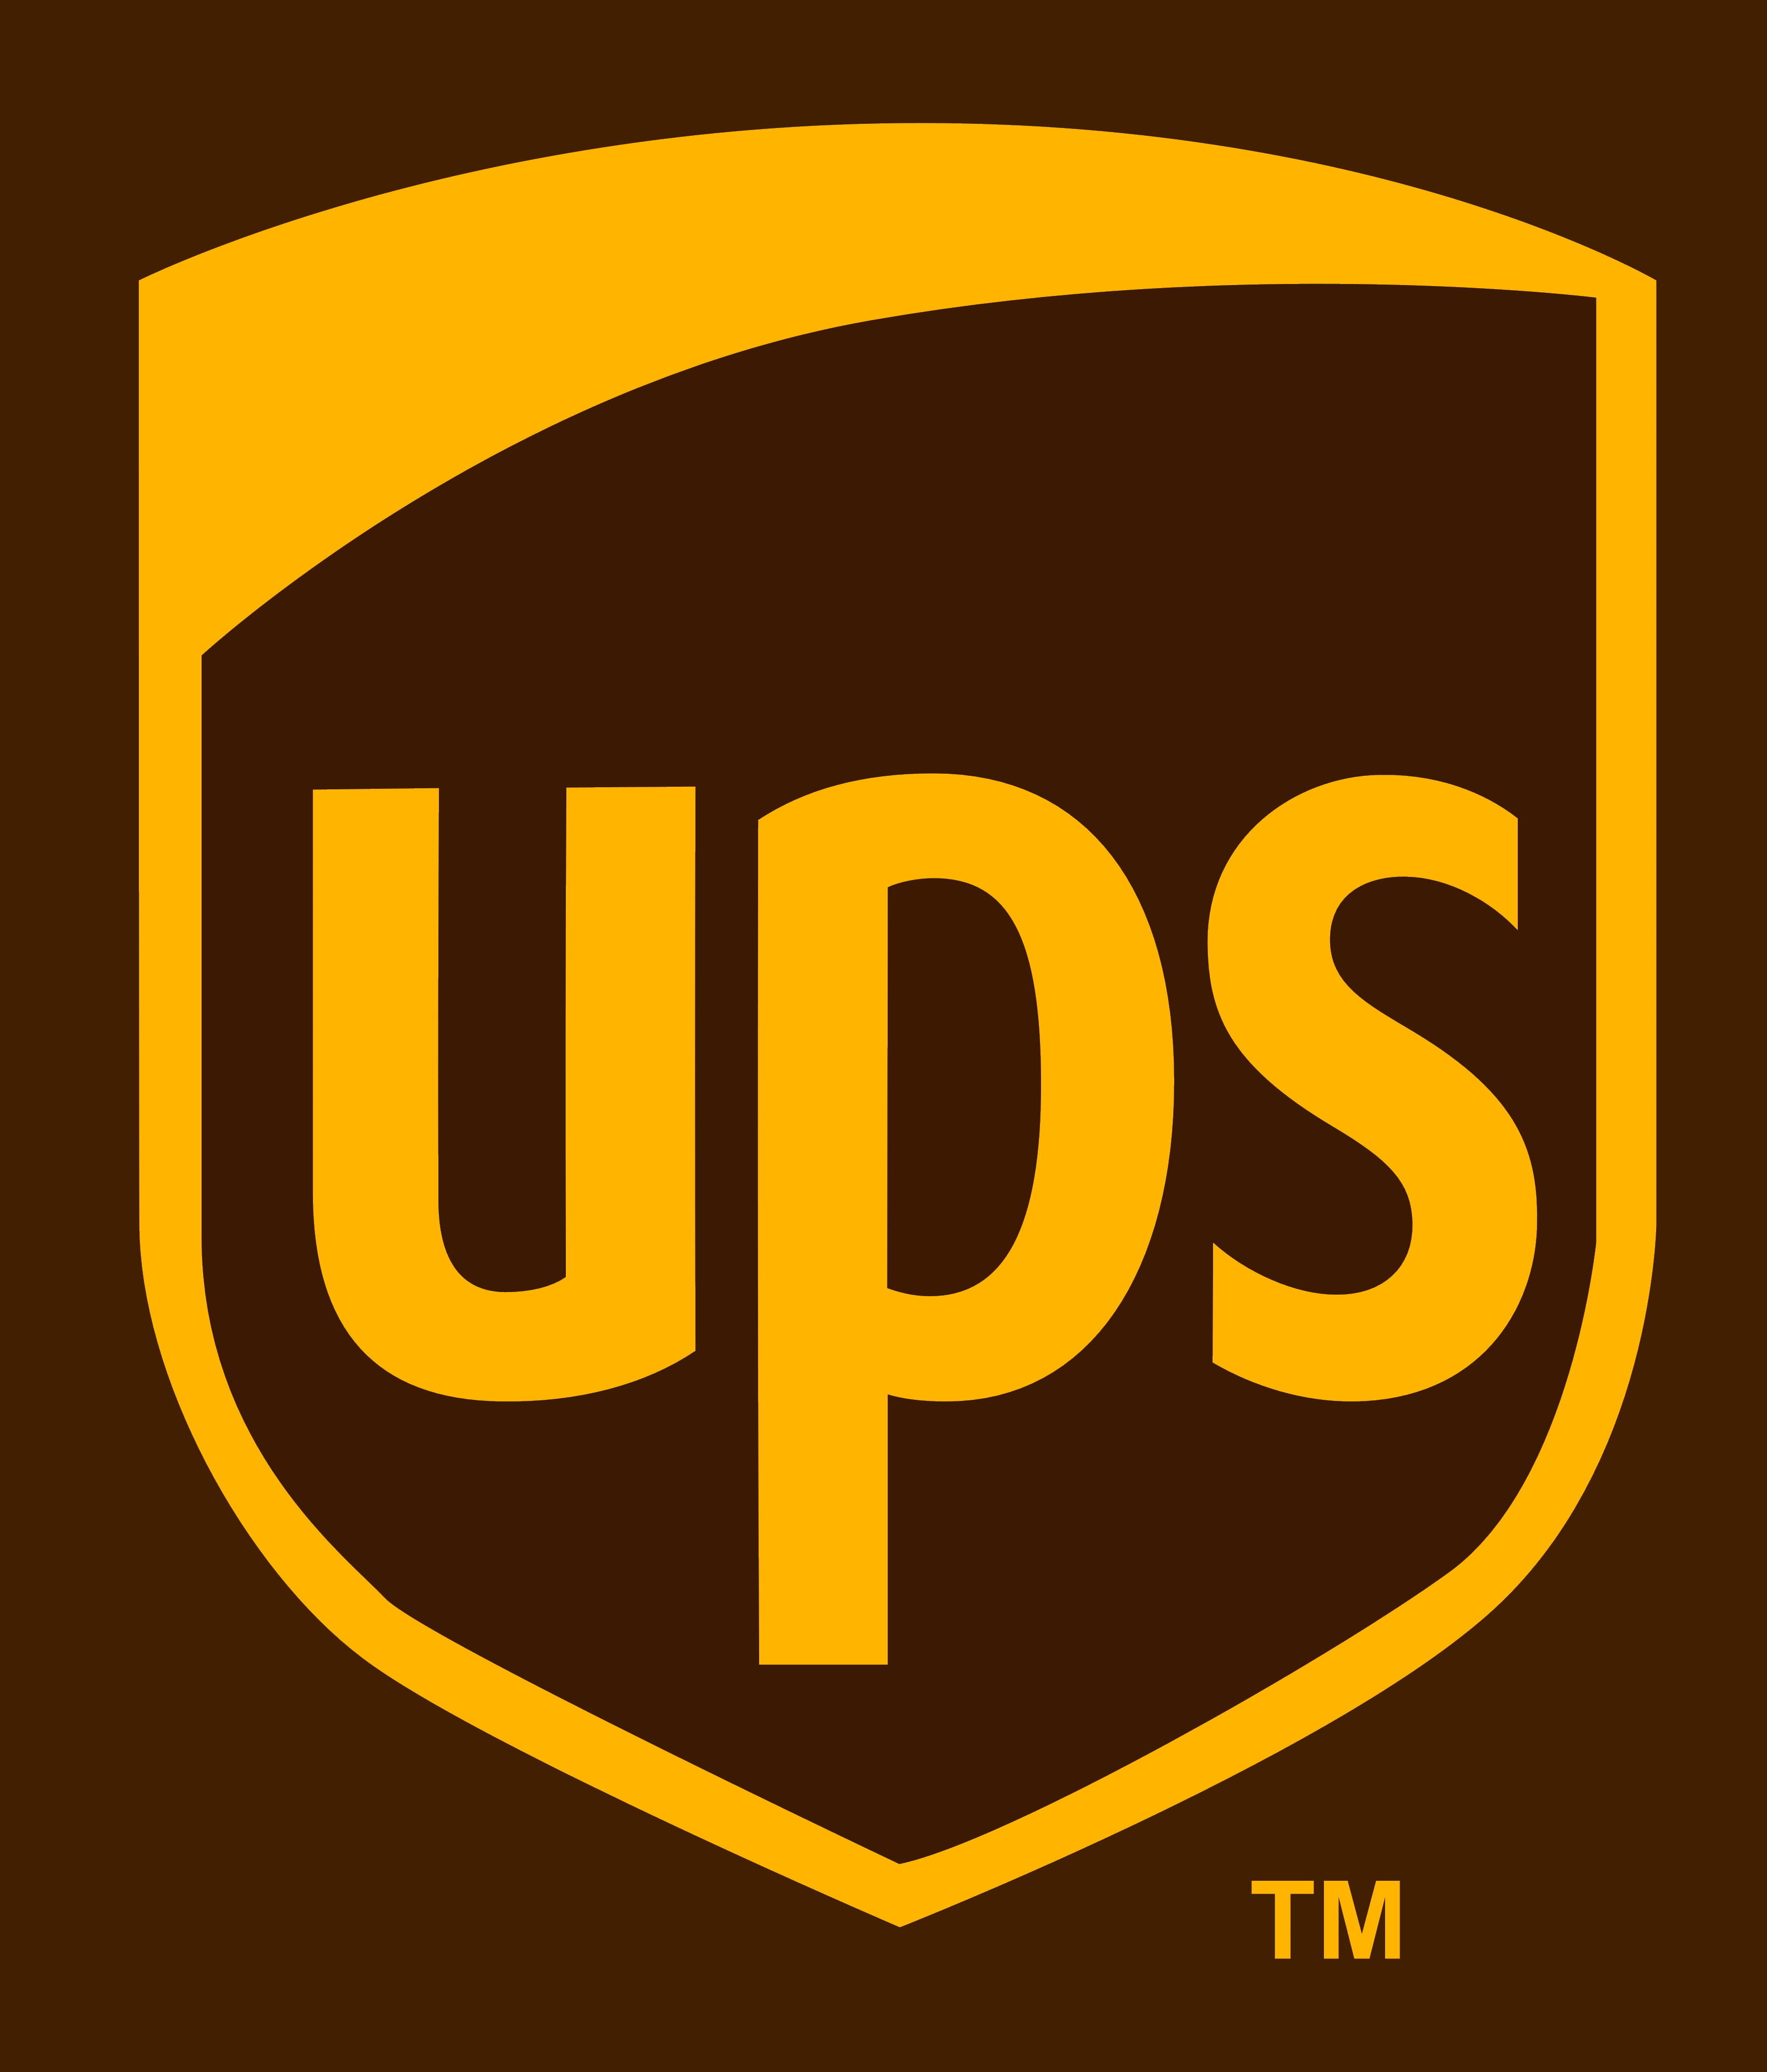 Ups Logos Over The Years